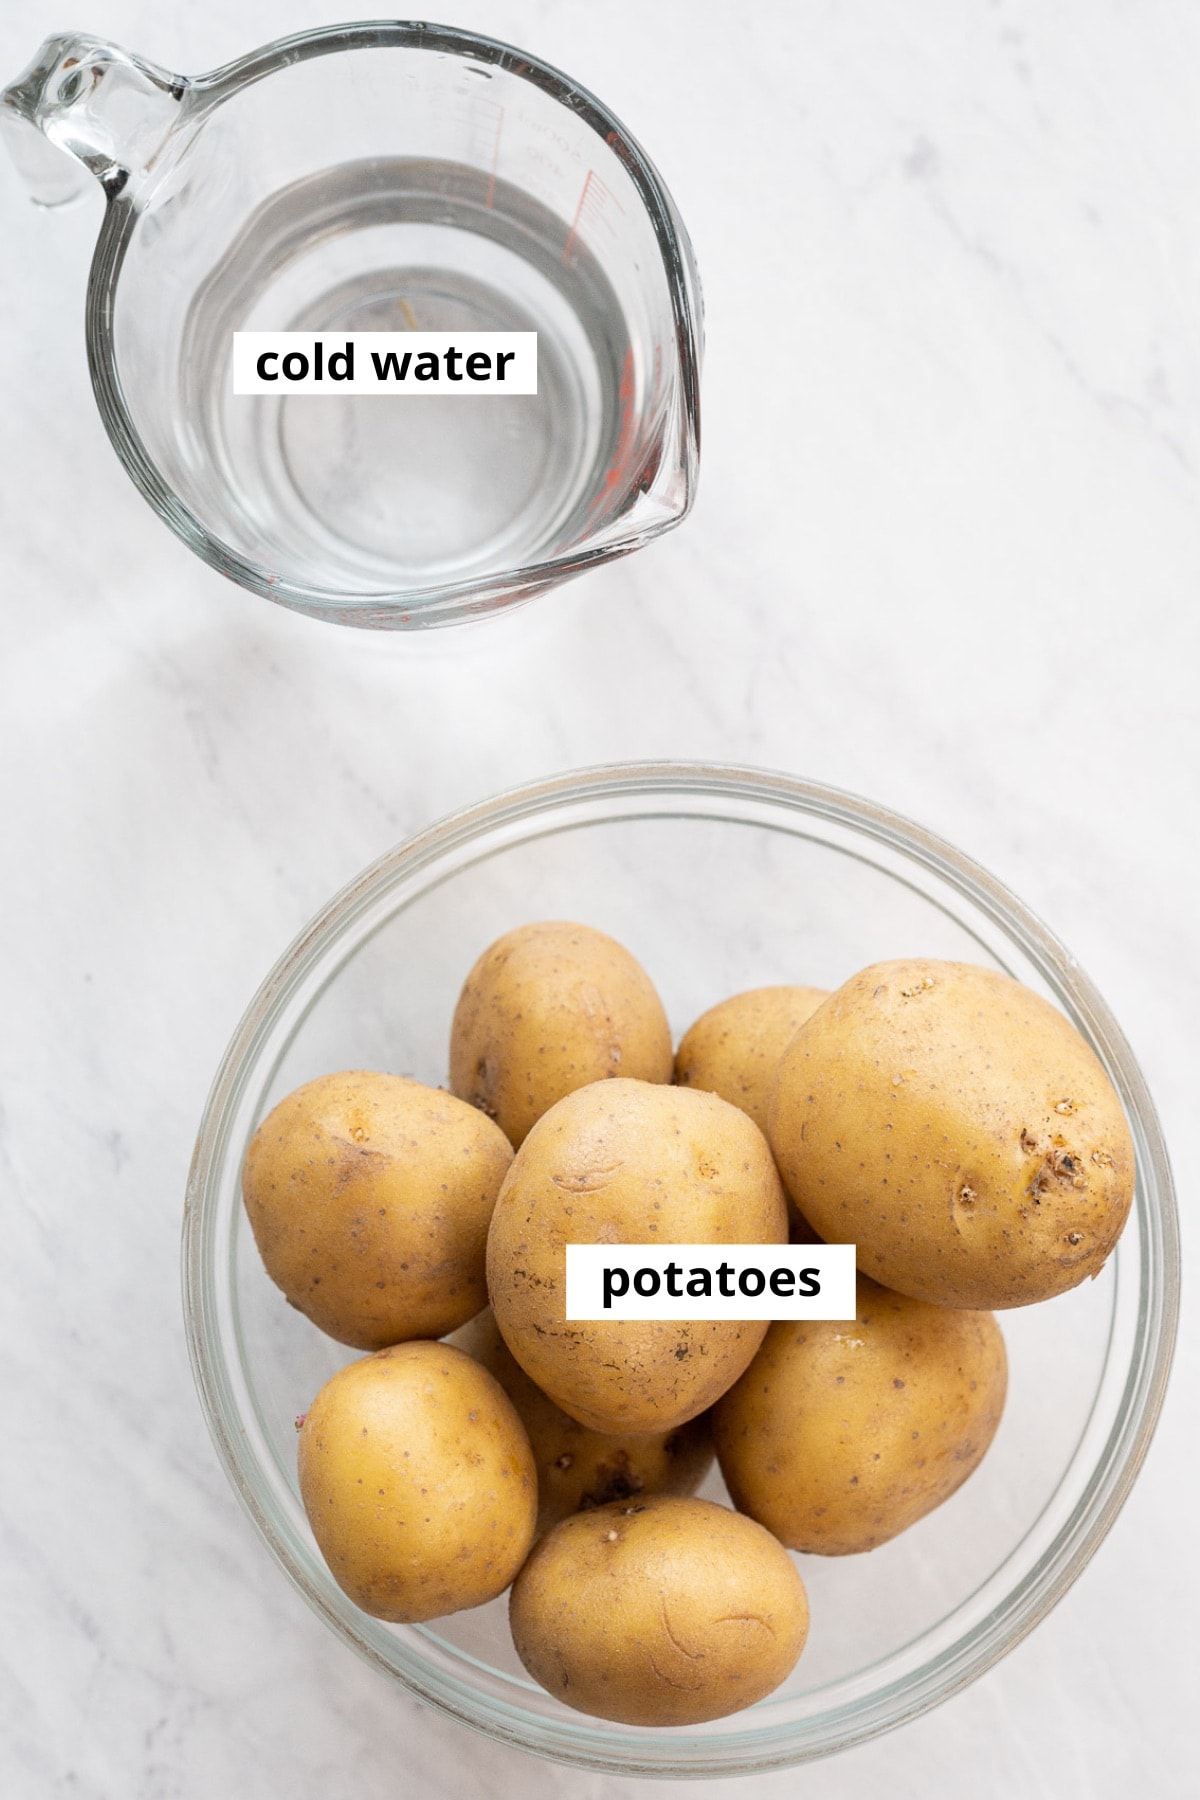 Water and potatoes.